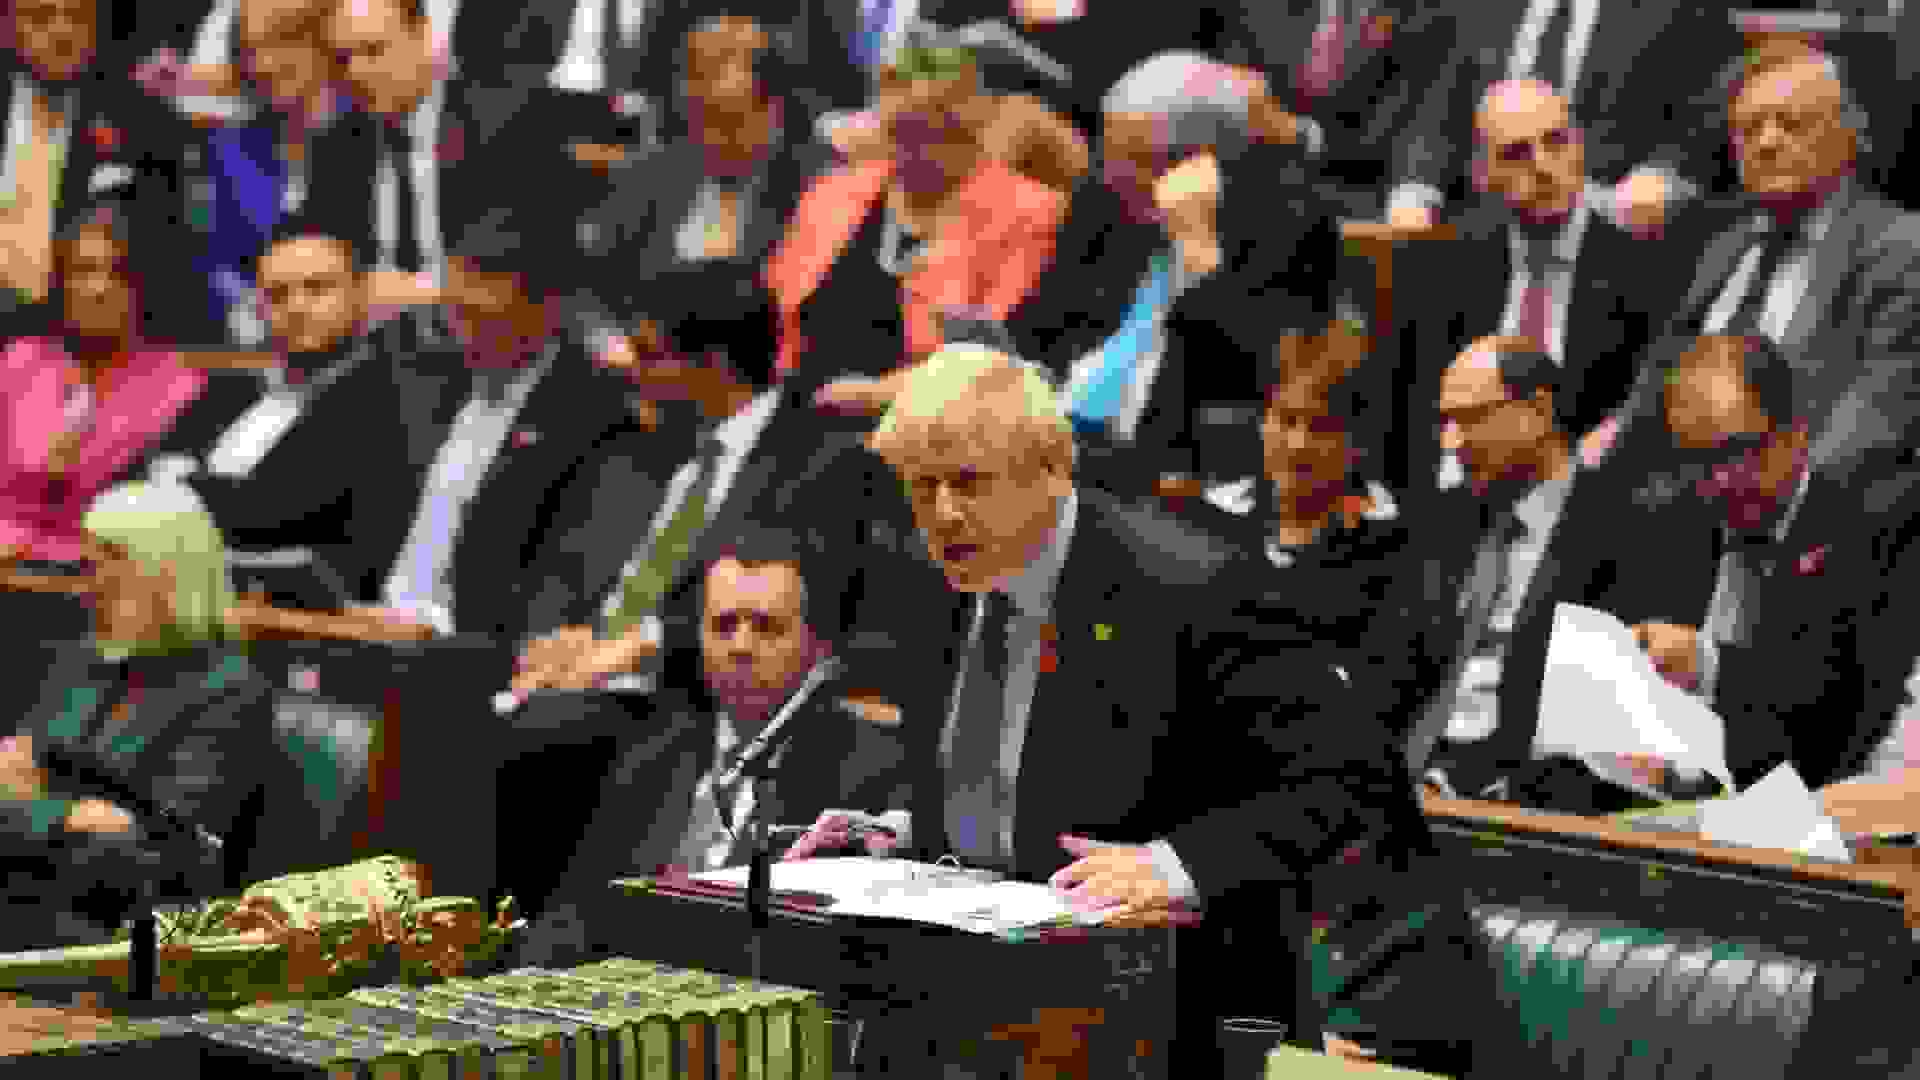 Prime Minister Boris Johnson at the despatch box for Prime Ministers Questions. UK Parliament / Jessica Taylor